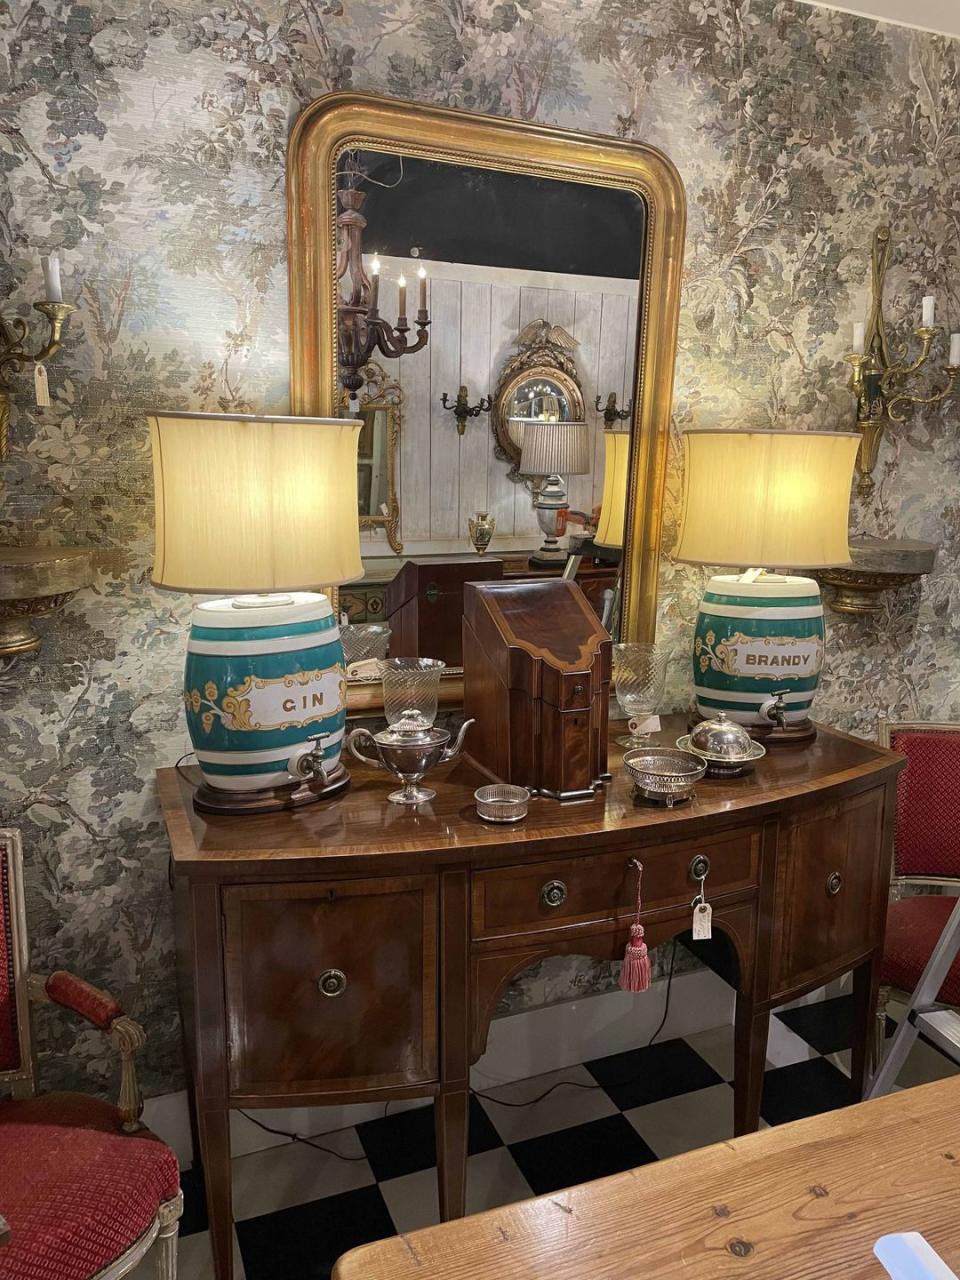 Photo credit: Courtesy of Kenny Ball Antiques